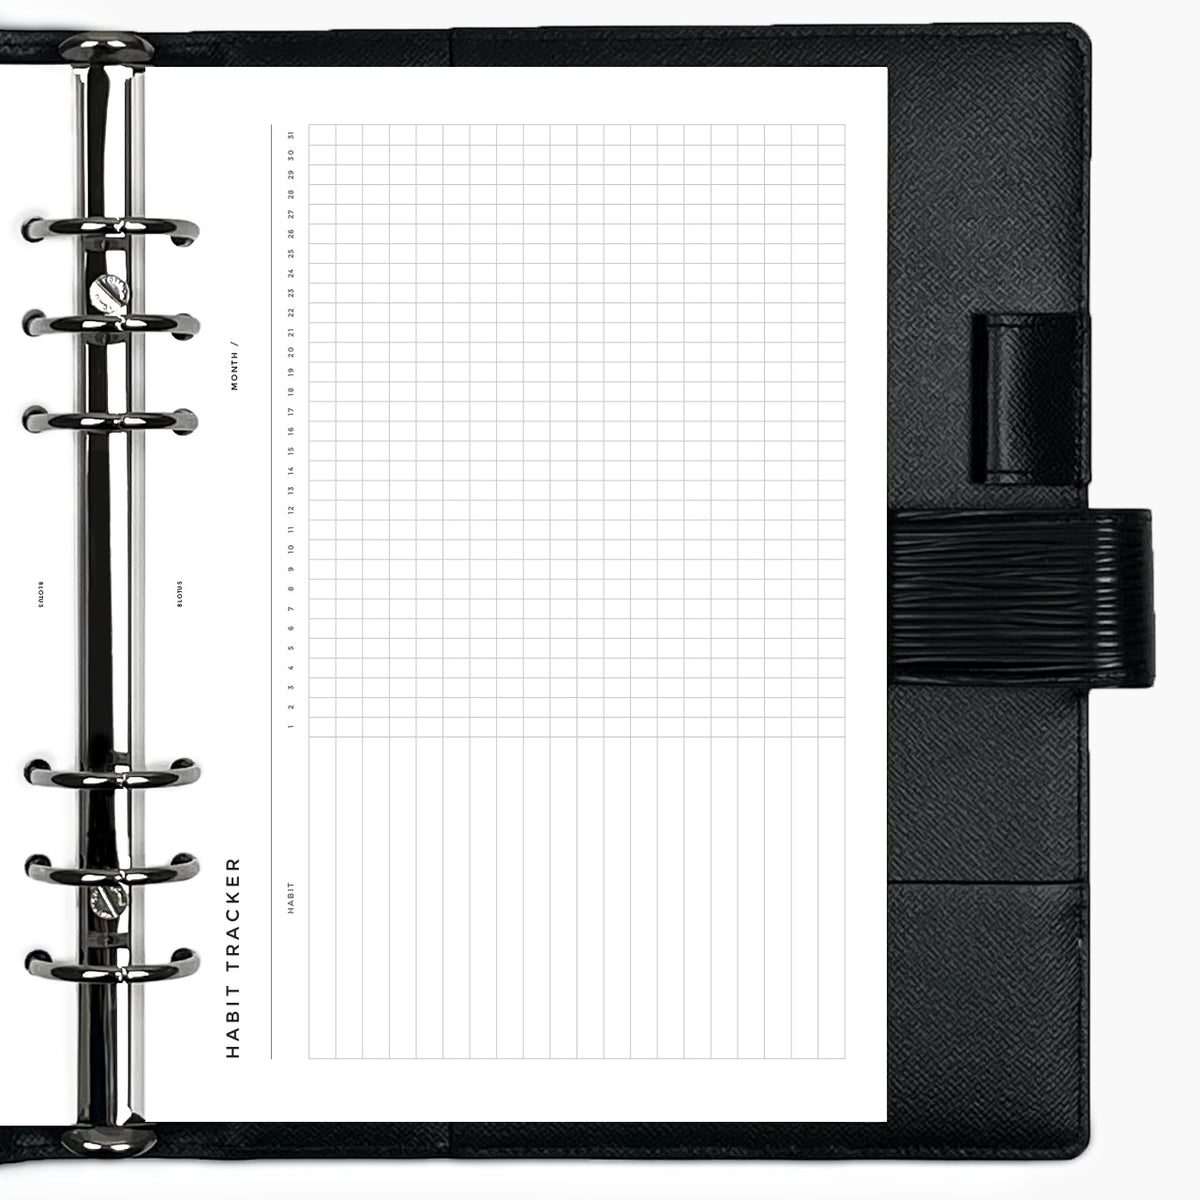 PRINTED Habit Tracker Pages | Printed Personal Planner Inserts | Printed  Louis Vuitton Agenda MM Inserts | Filofax Personal Planner Inserts